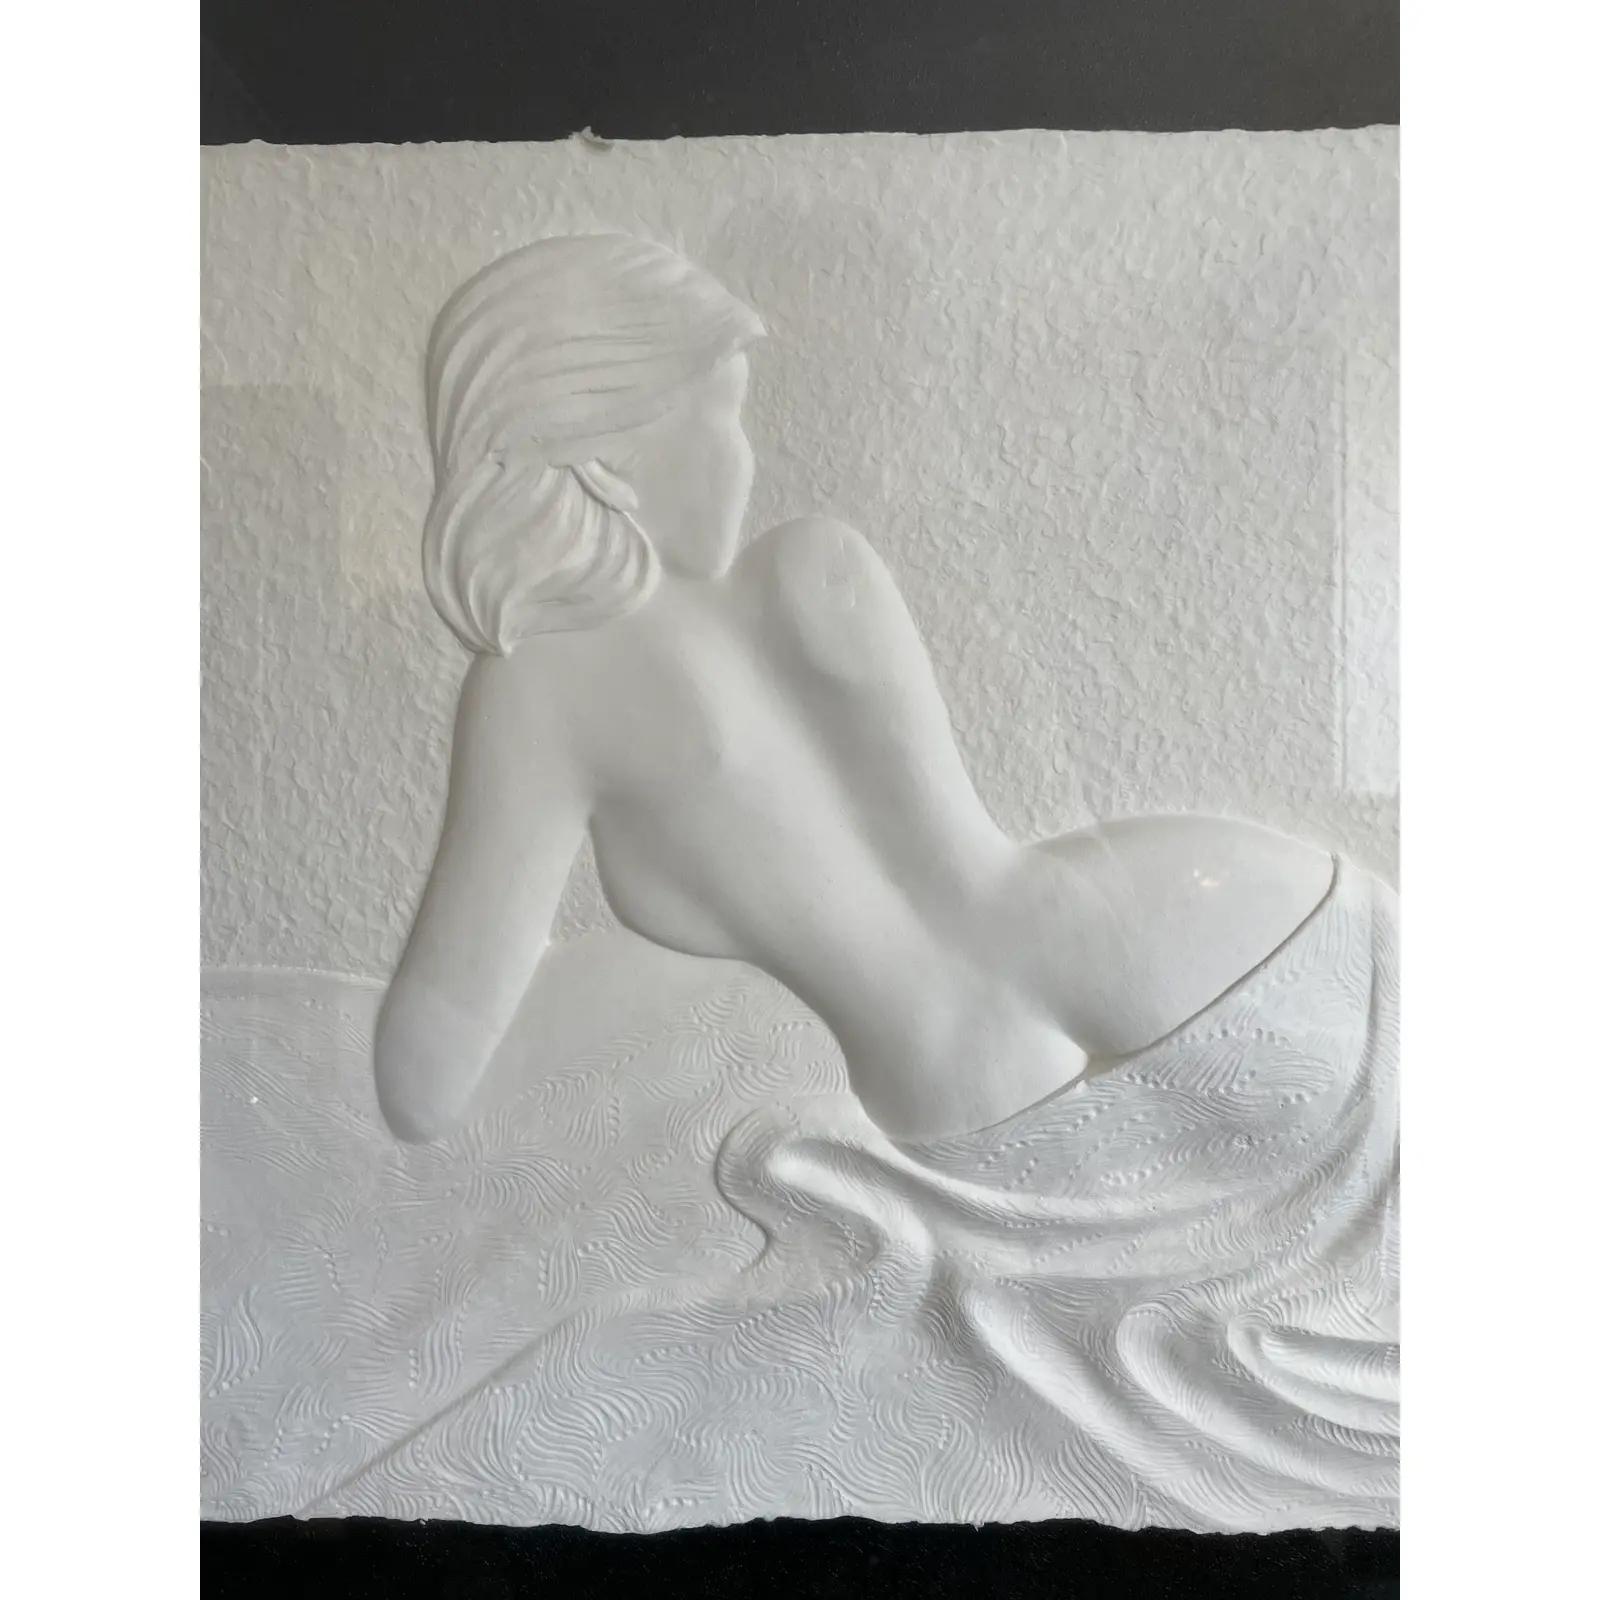 A paper mache base relief sculpture by portrait artist Roberta Peck, features a limited edition composition of a sultry reclining nude.
Signed and numbered 21/125 in pencil, showcased in a Chrome frame and contrasting black background.
Gallery